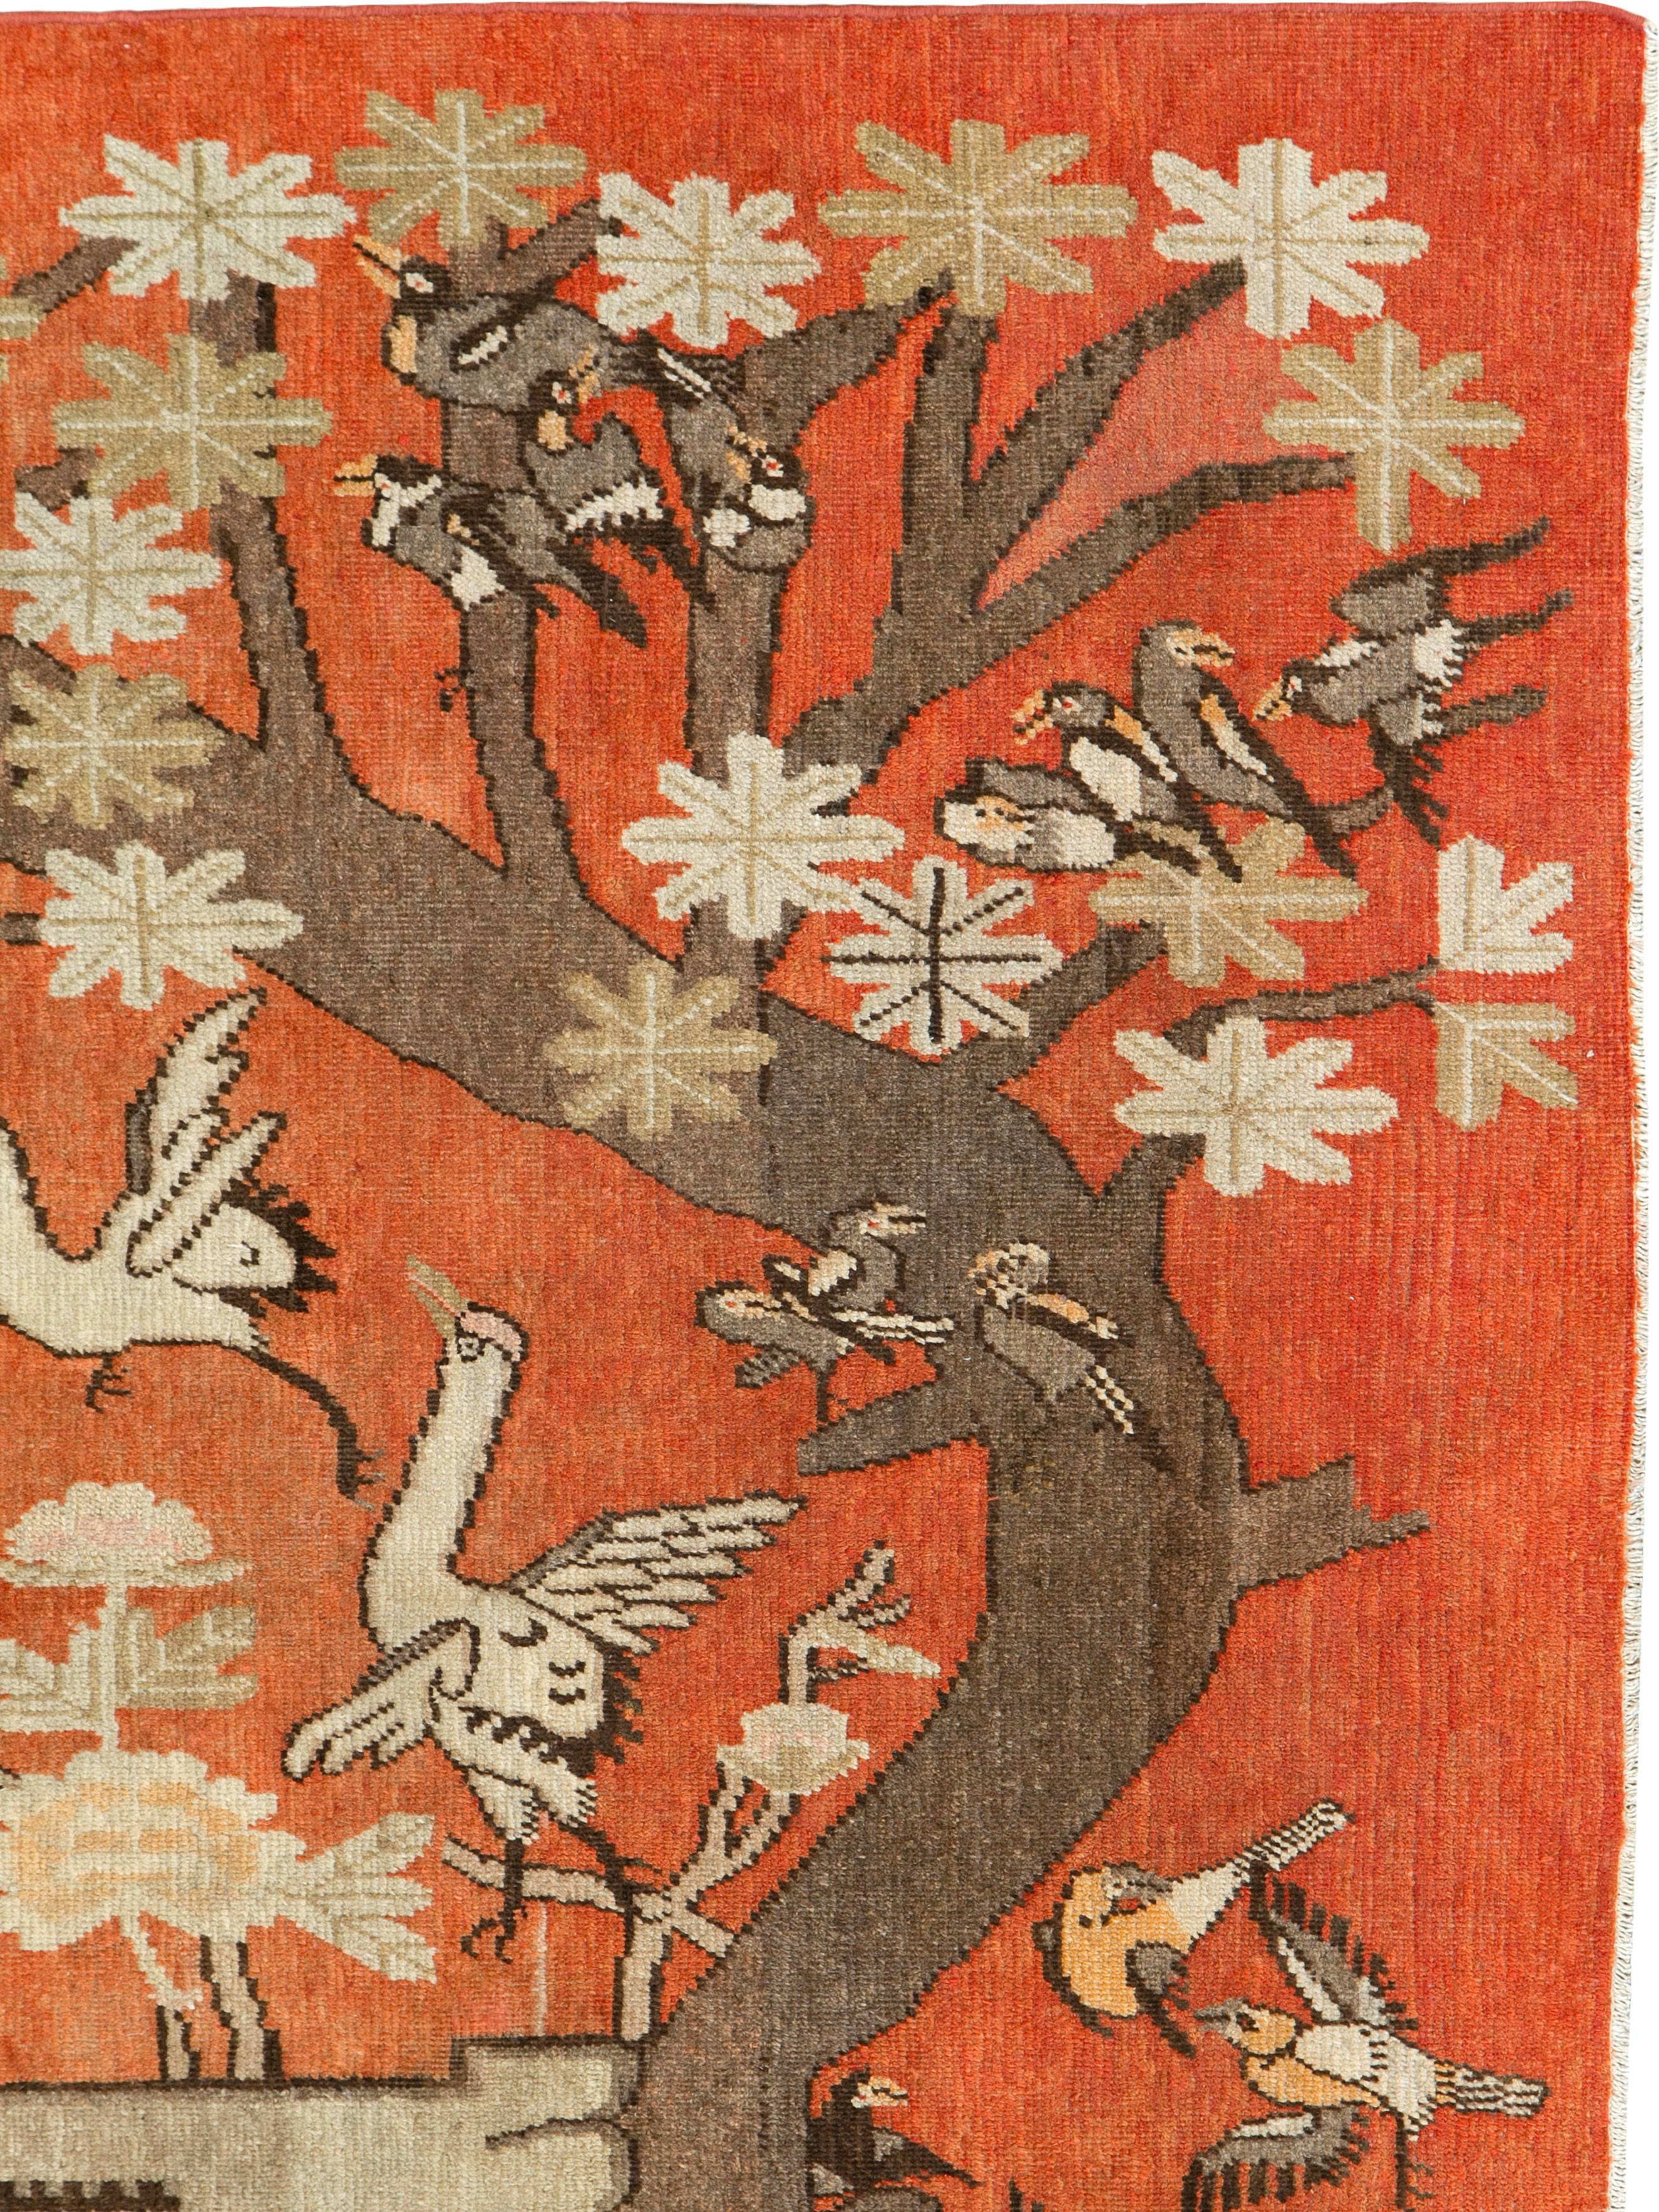 An antique East Turkestan Khotan rug from the second quarter of the 20th century. The pictorial design shows several species of birds flocking around one large tree.